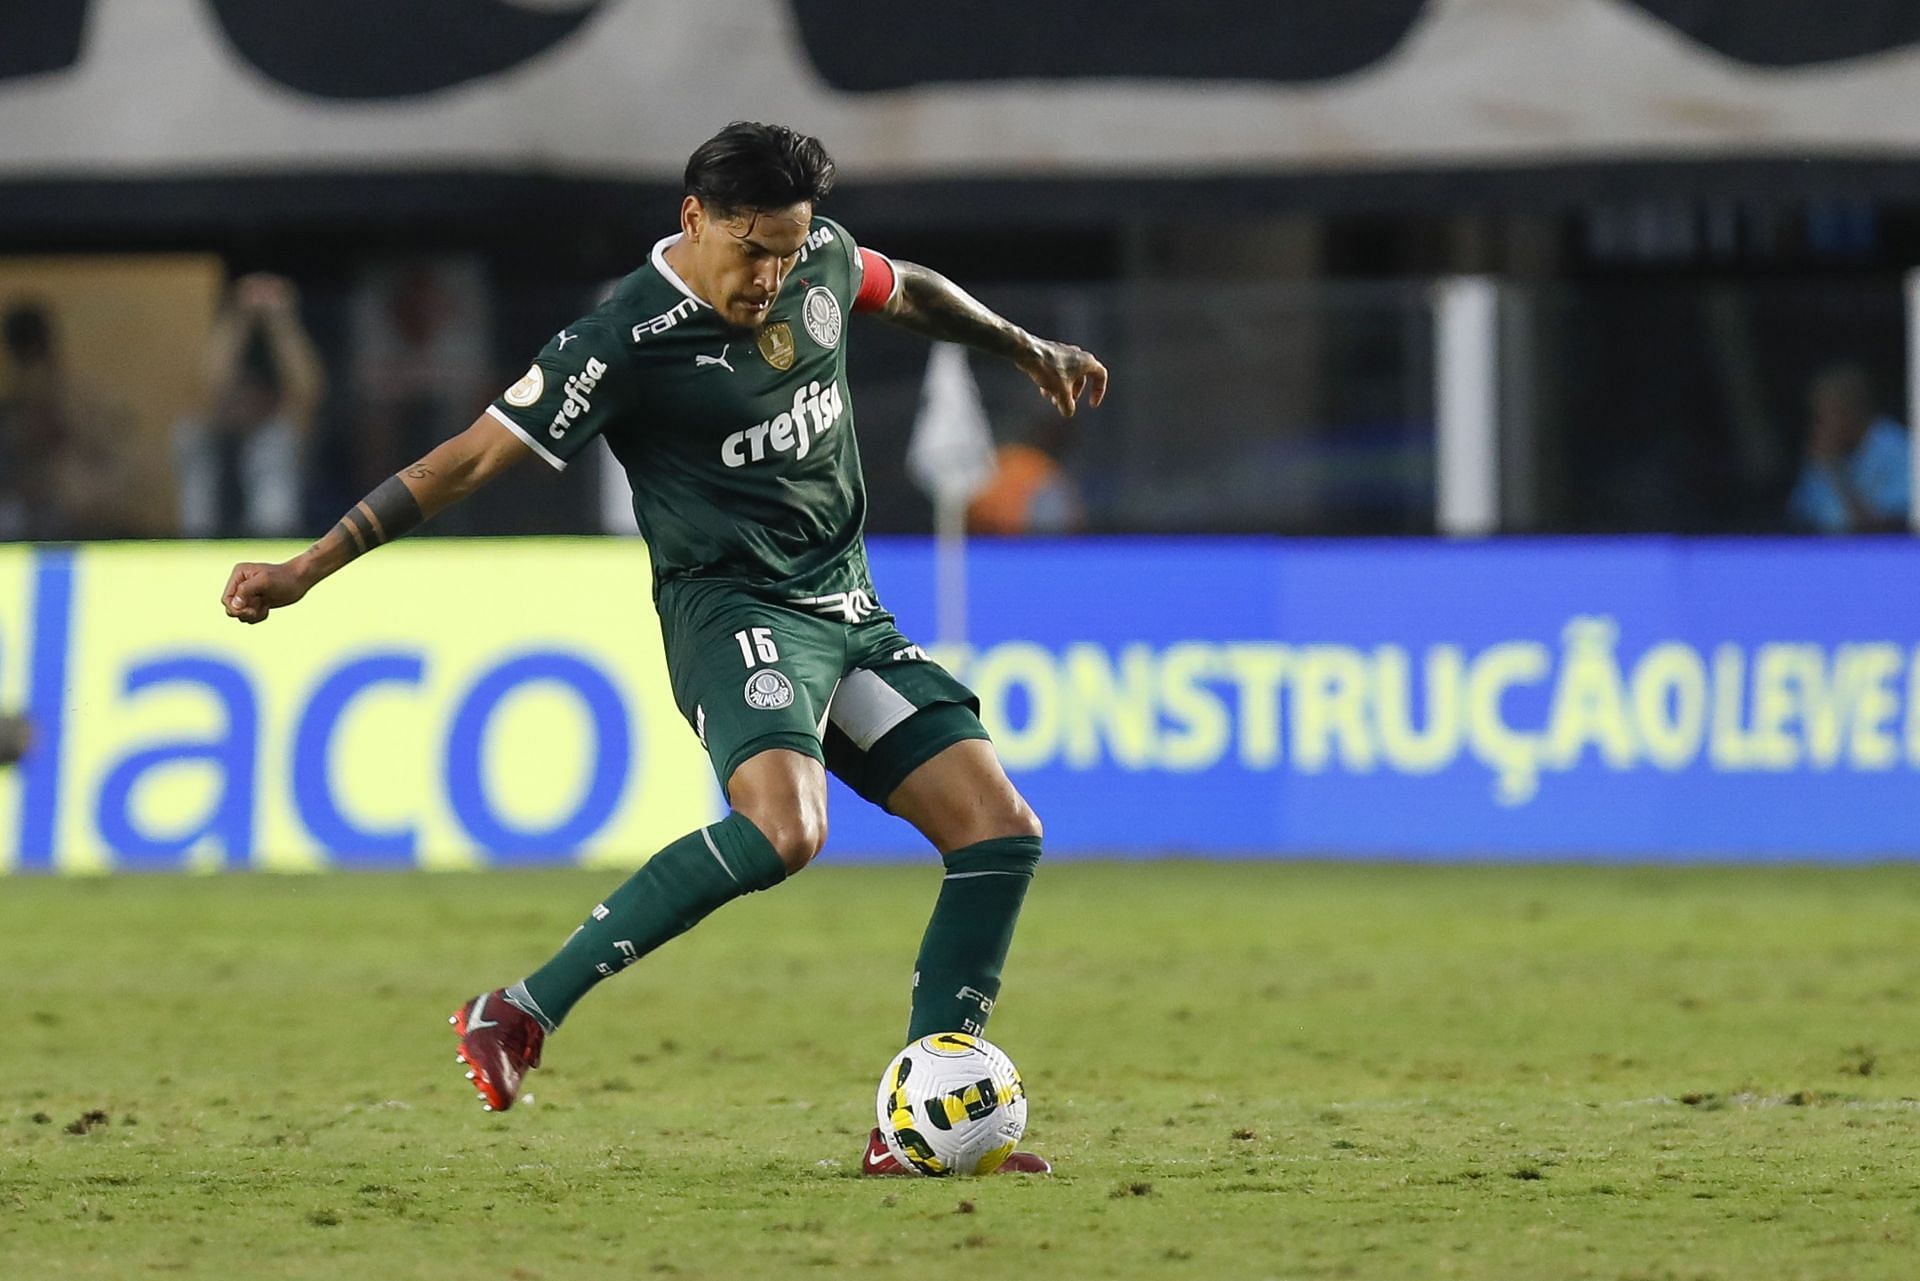 Palmeiras can go to the top of the standings if they record a win against Botafogo